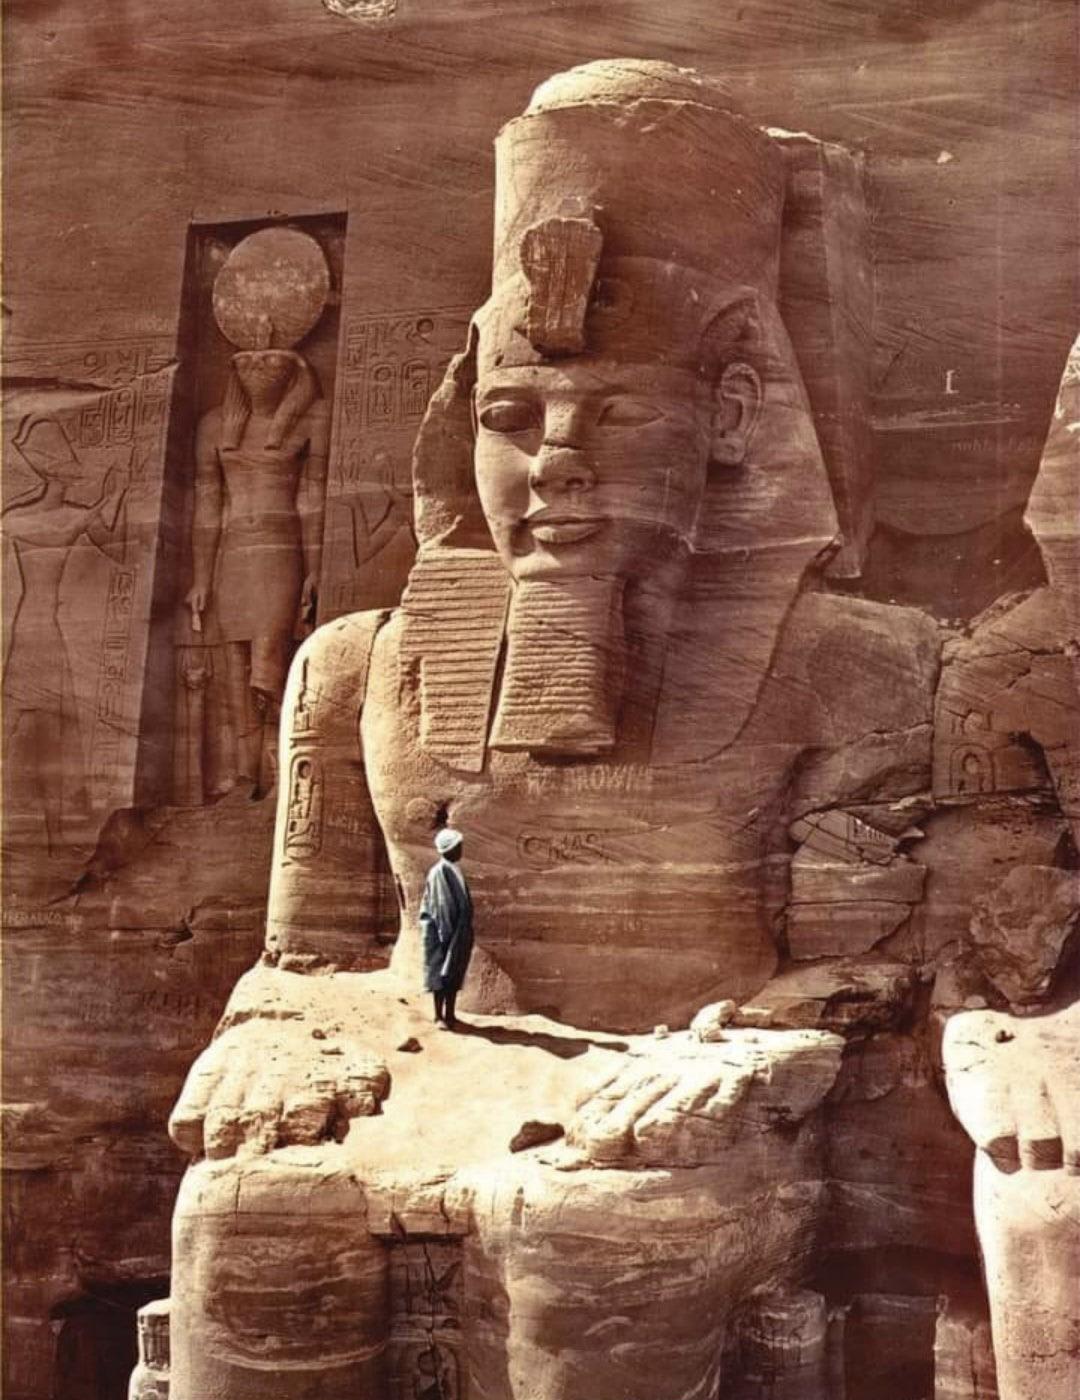 Man stands on the colossal statue of Ramses II of the Abu Simbel temple (Egypt), 1865.